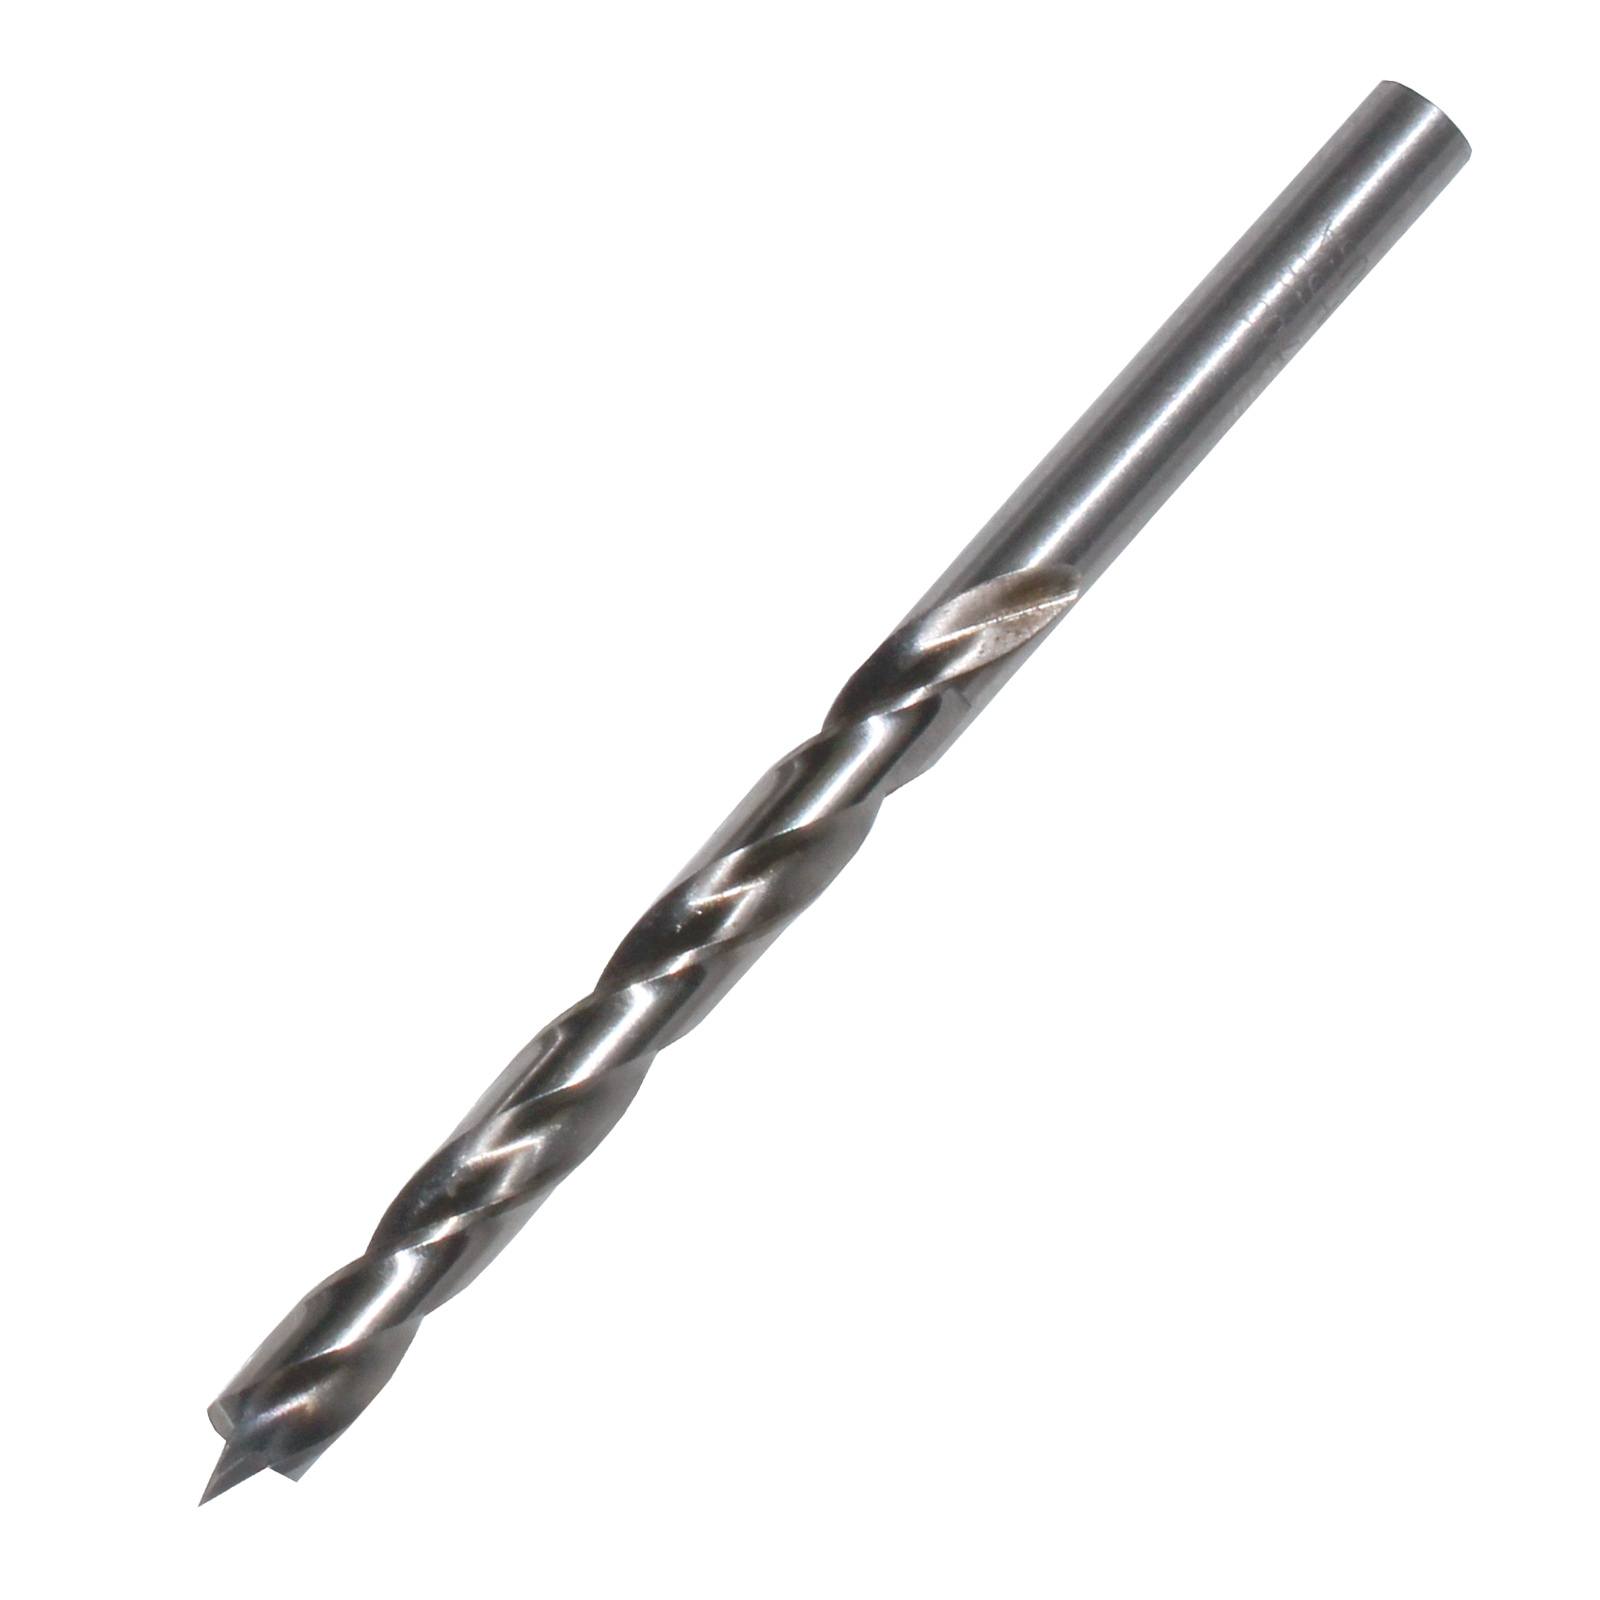 Aexit 8mm Threaded Drill Bits Tip Hex Shaft Wood Auger Drill Bit Brad-Point Drill Bits 45cm Length 